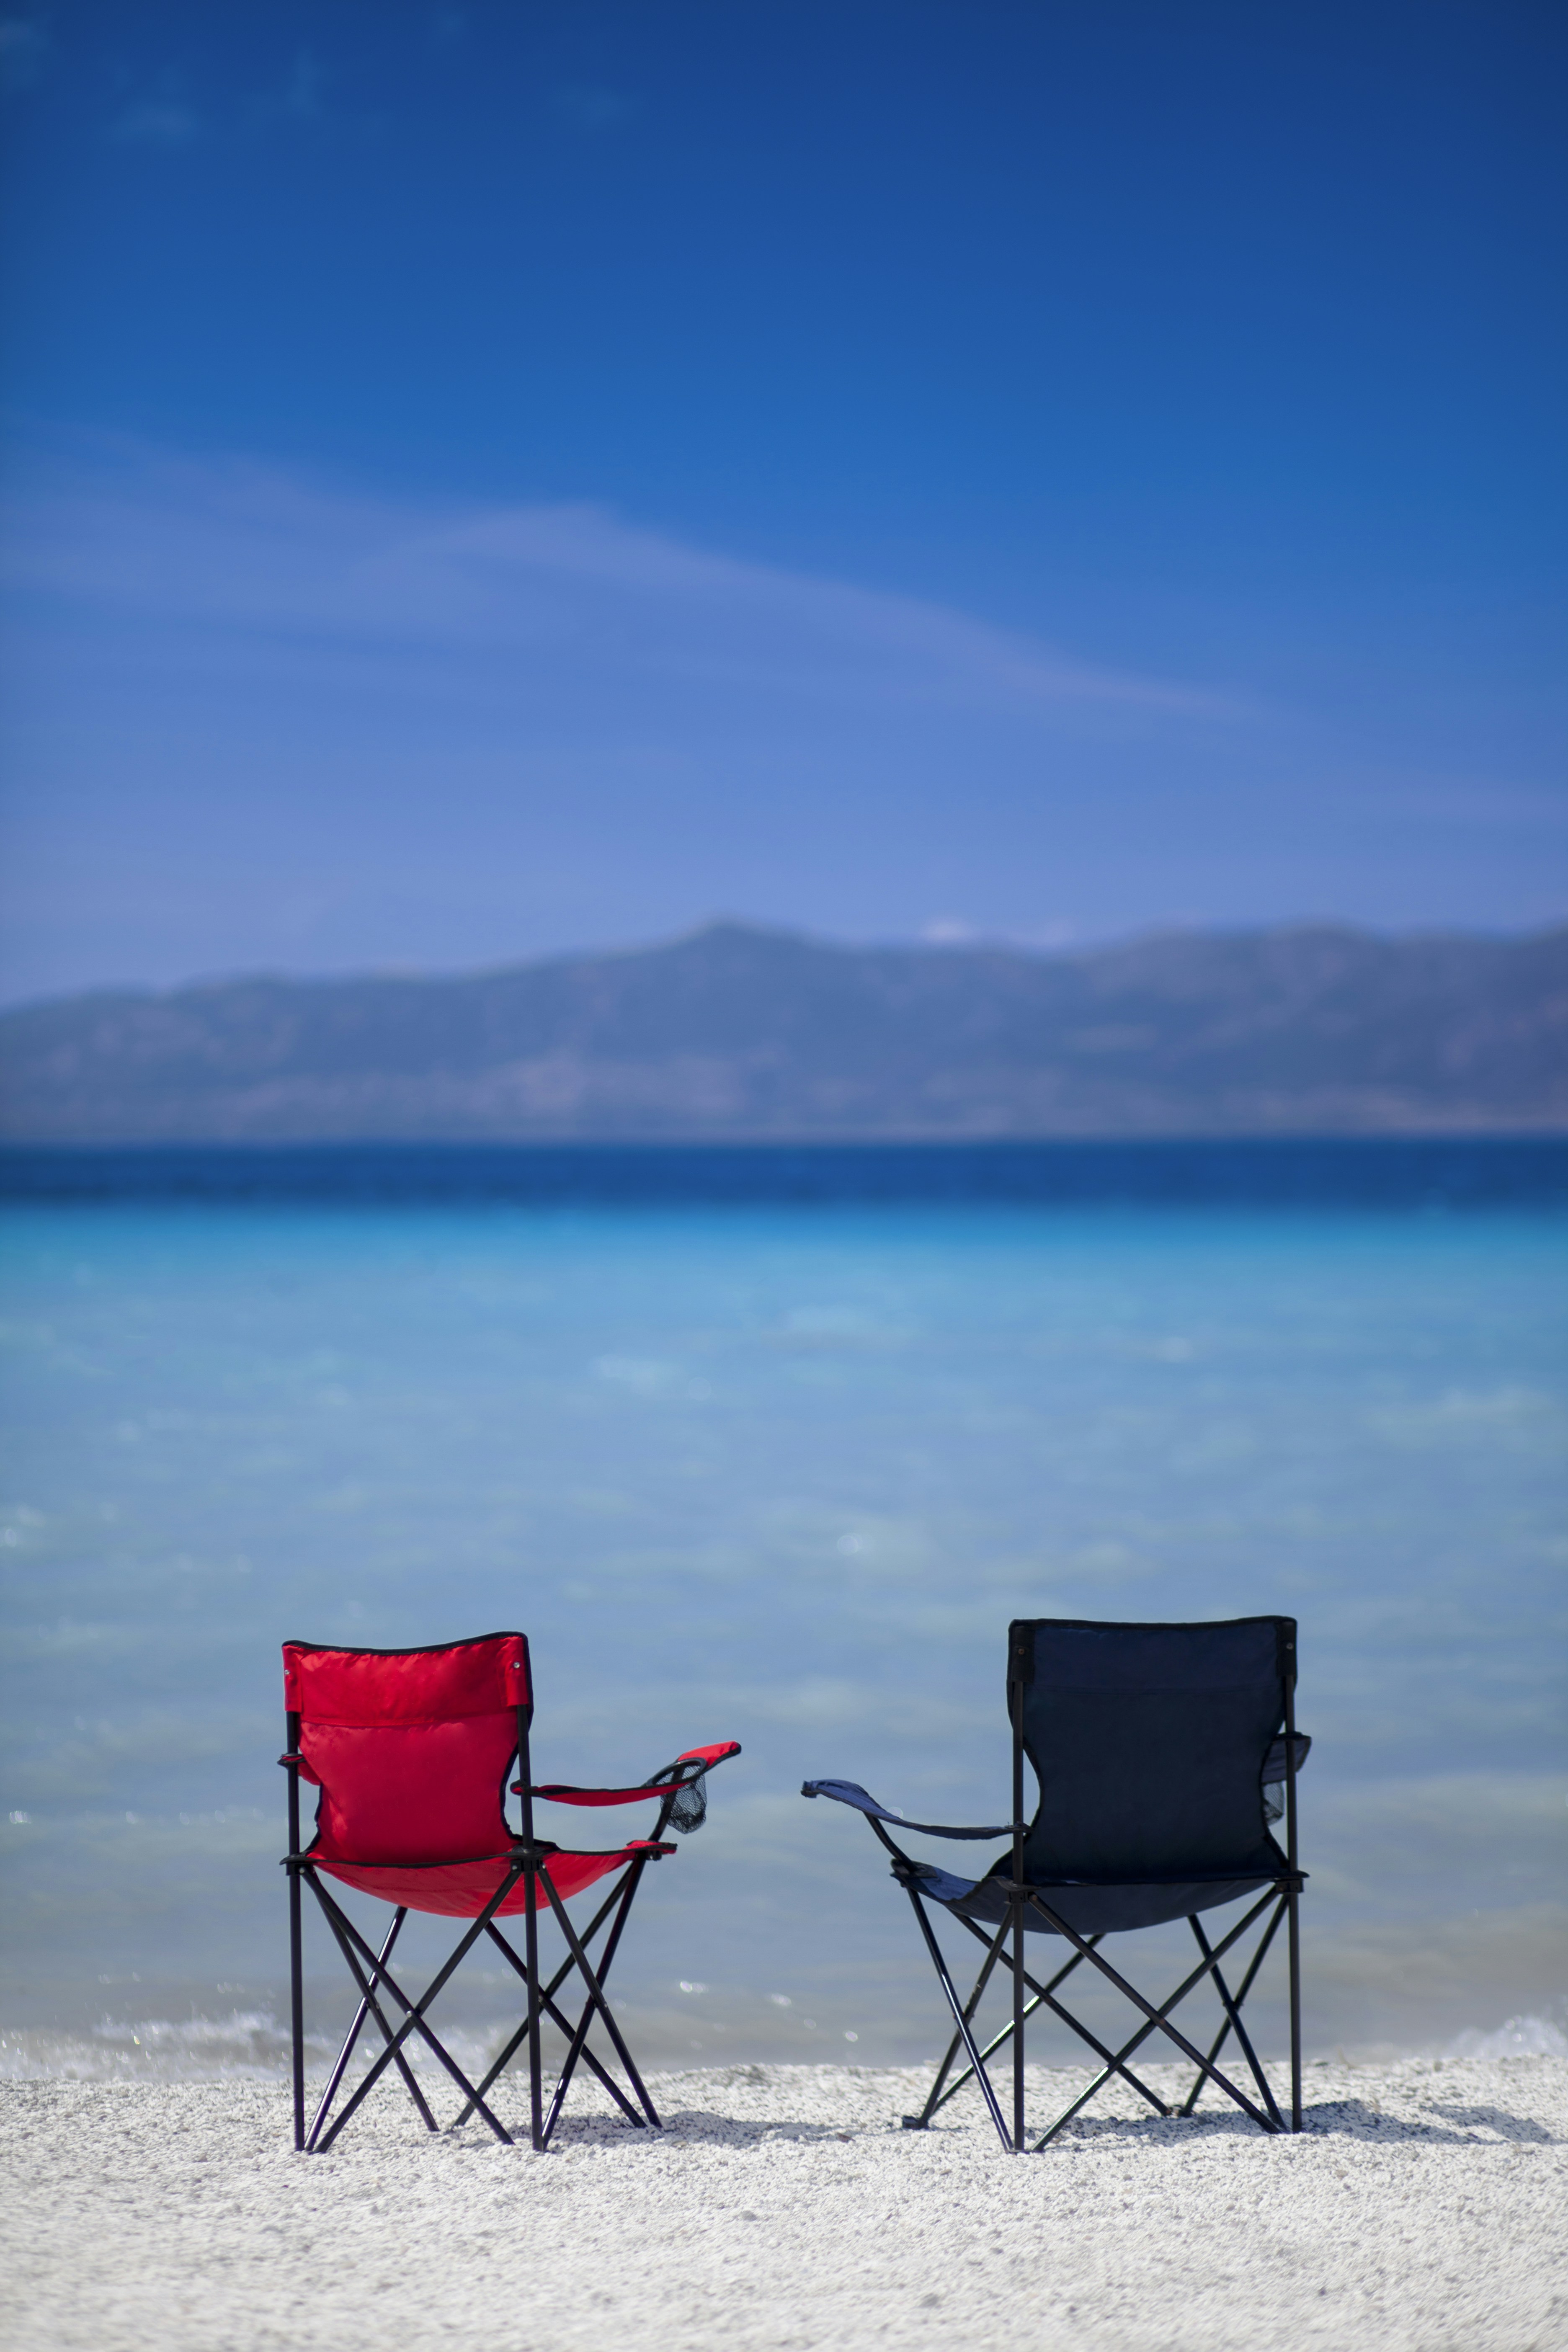 Are Camping Chairs Good For The Beach